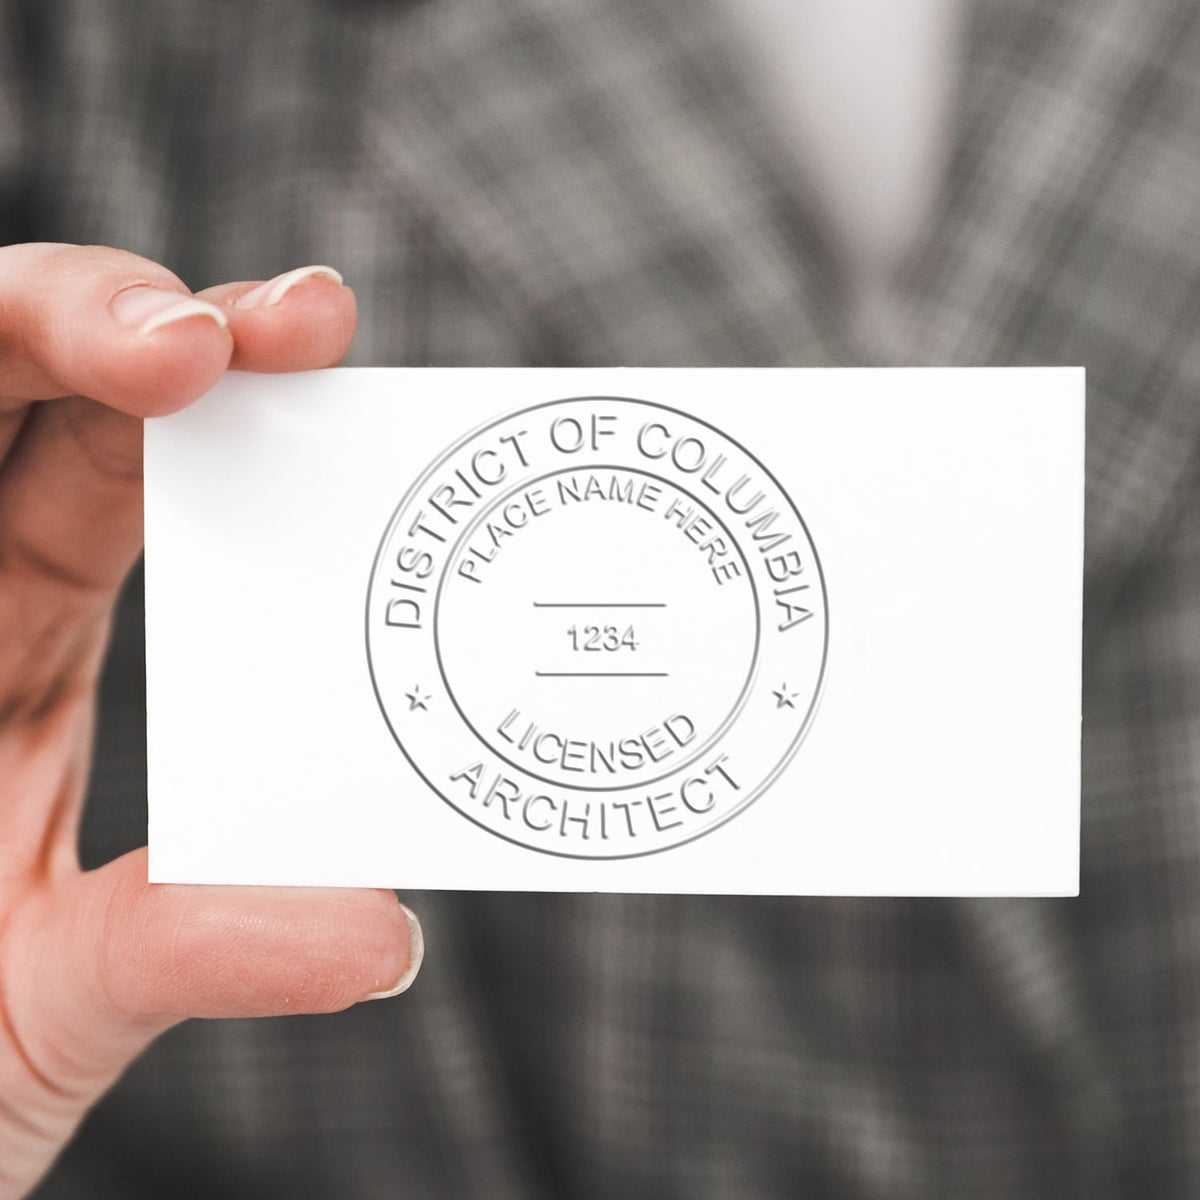 The District of Columbia Desk Architect Embossing Seal stamp impression comes to life with a crisp, detailed photo on paper - showcasing true professional quality.